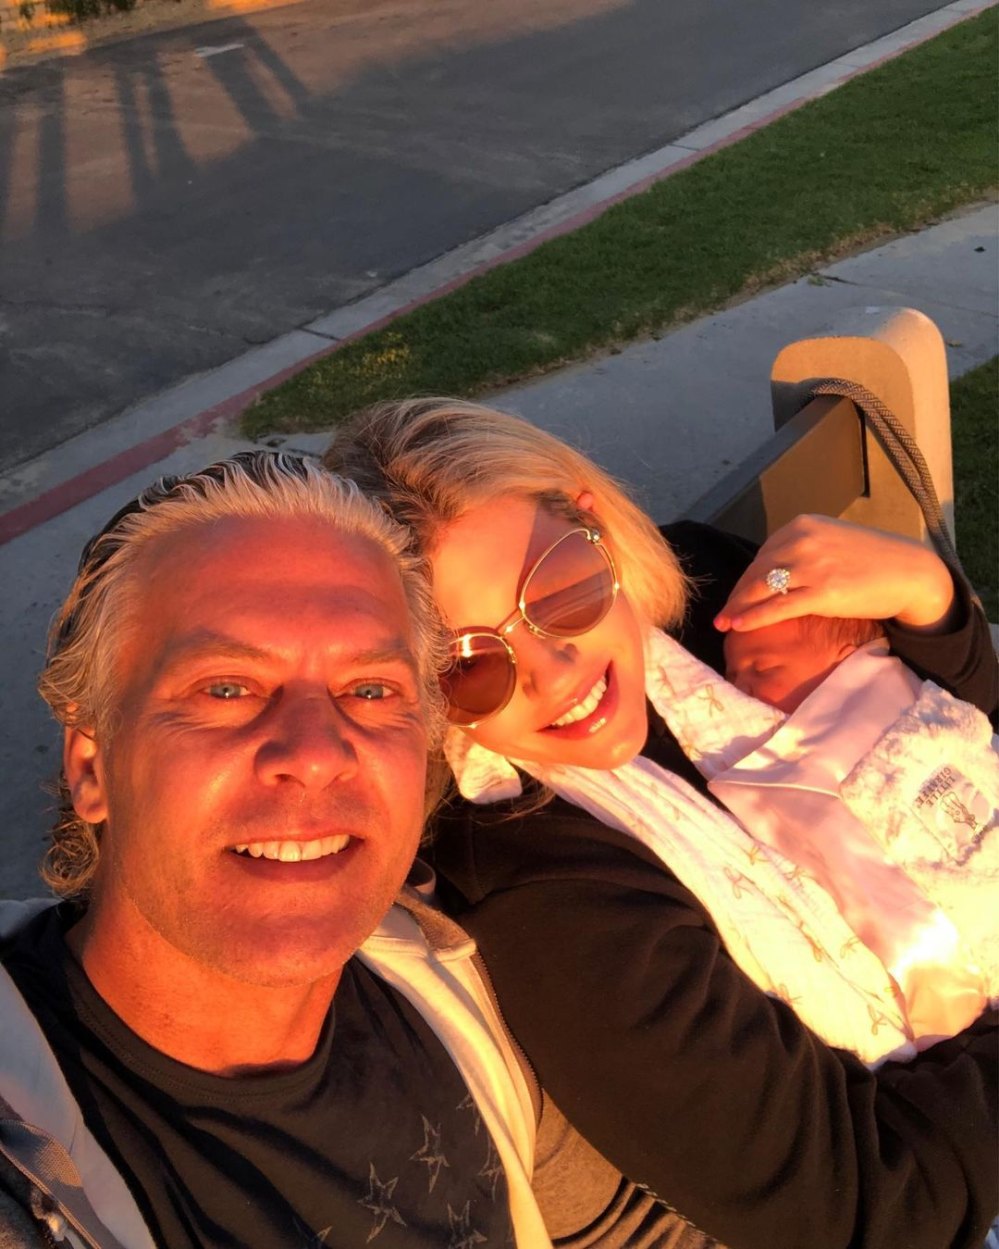 Shannon Beador Absolutely Sent David’s Wife Lesley a Baby Gift